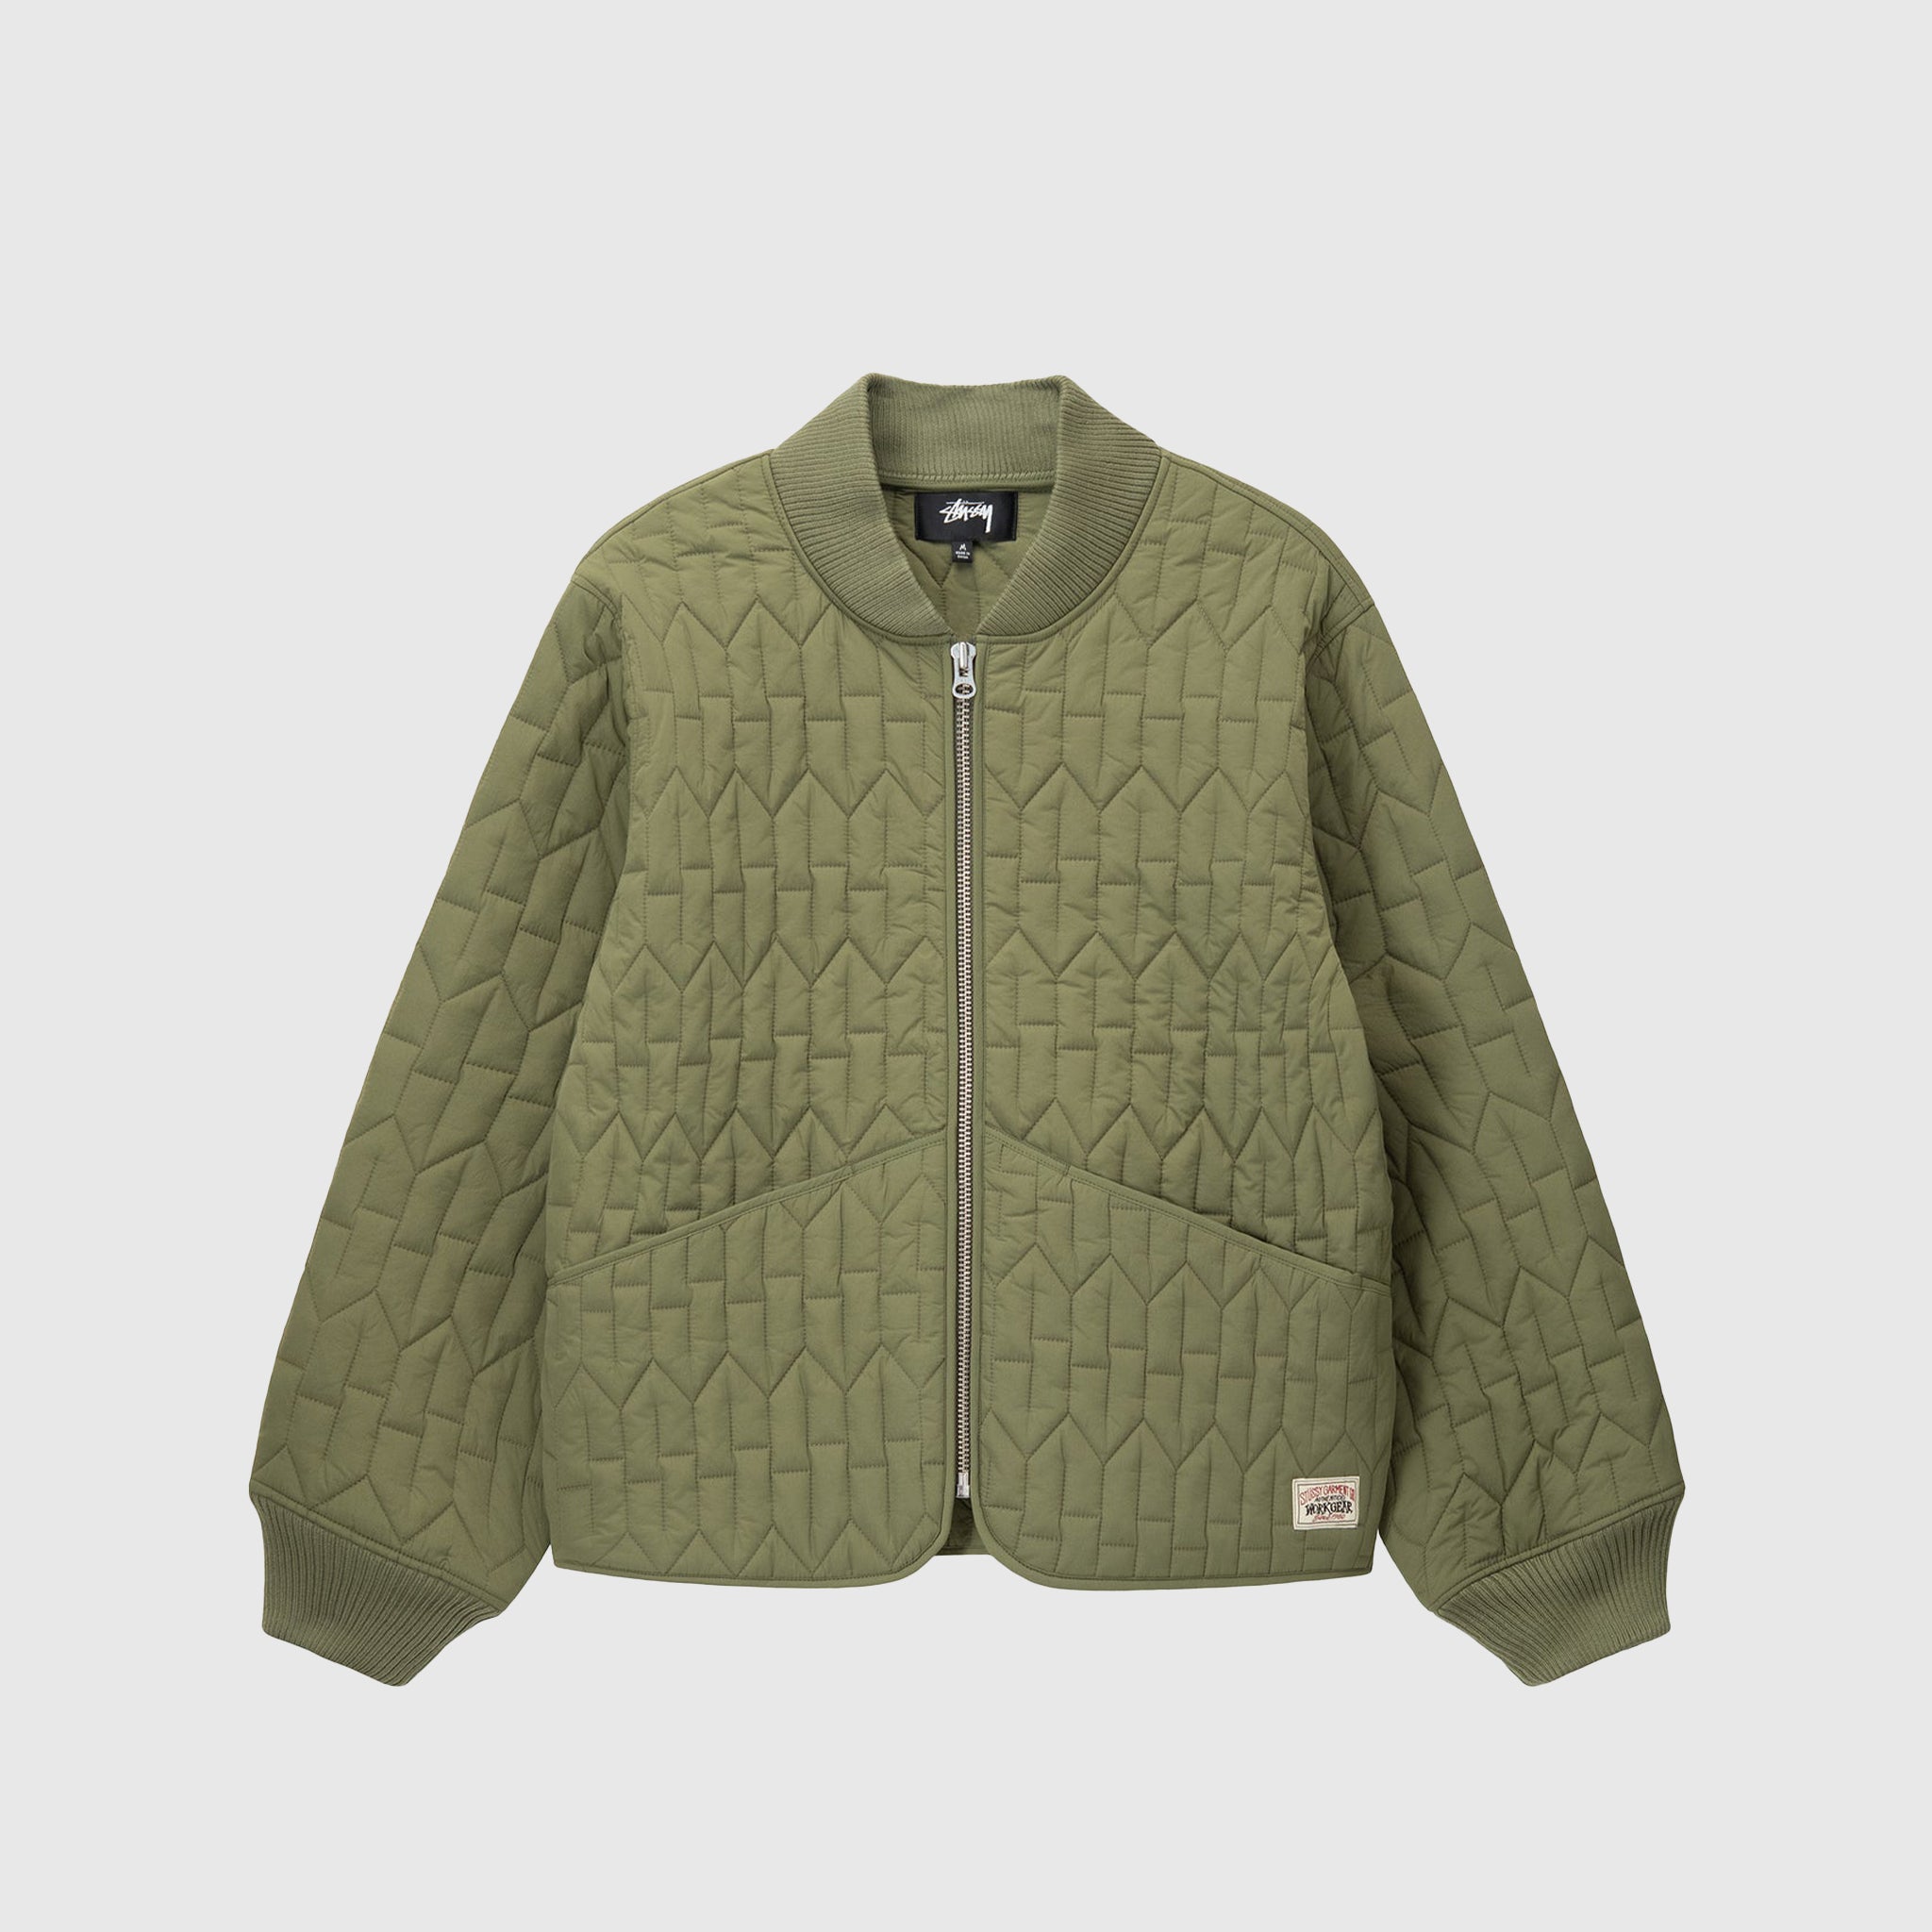 S QUILTED LINER JACKET – PACKER SHOES